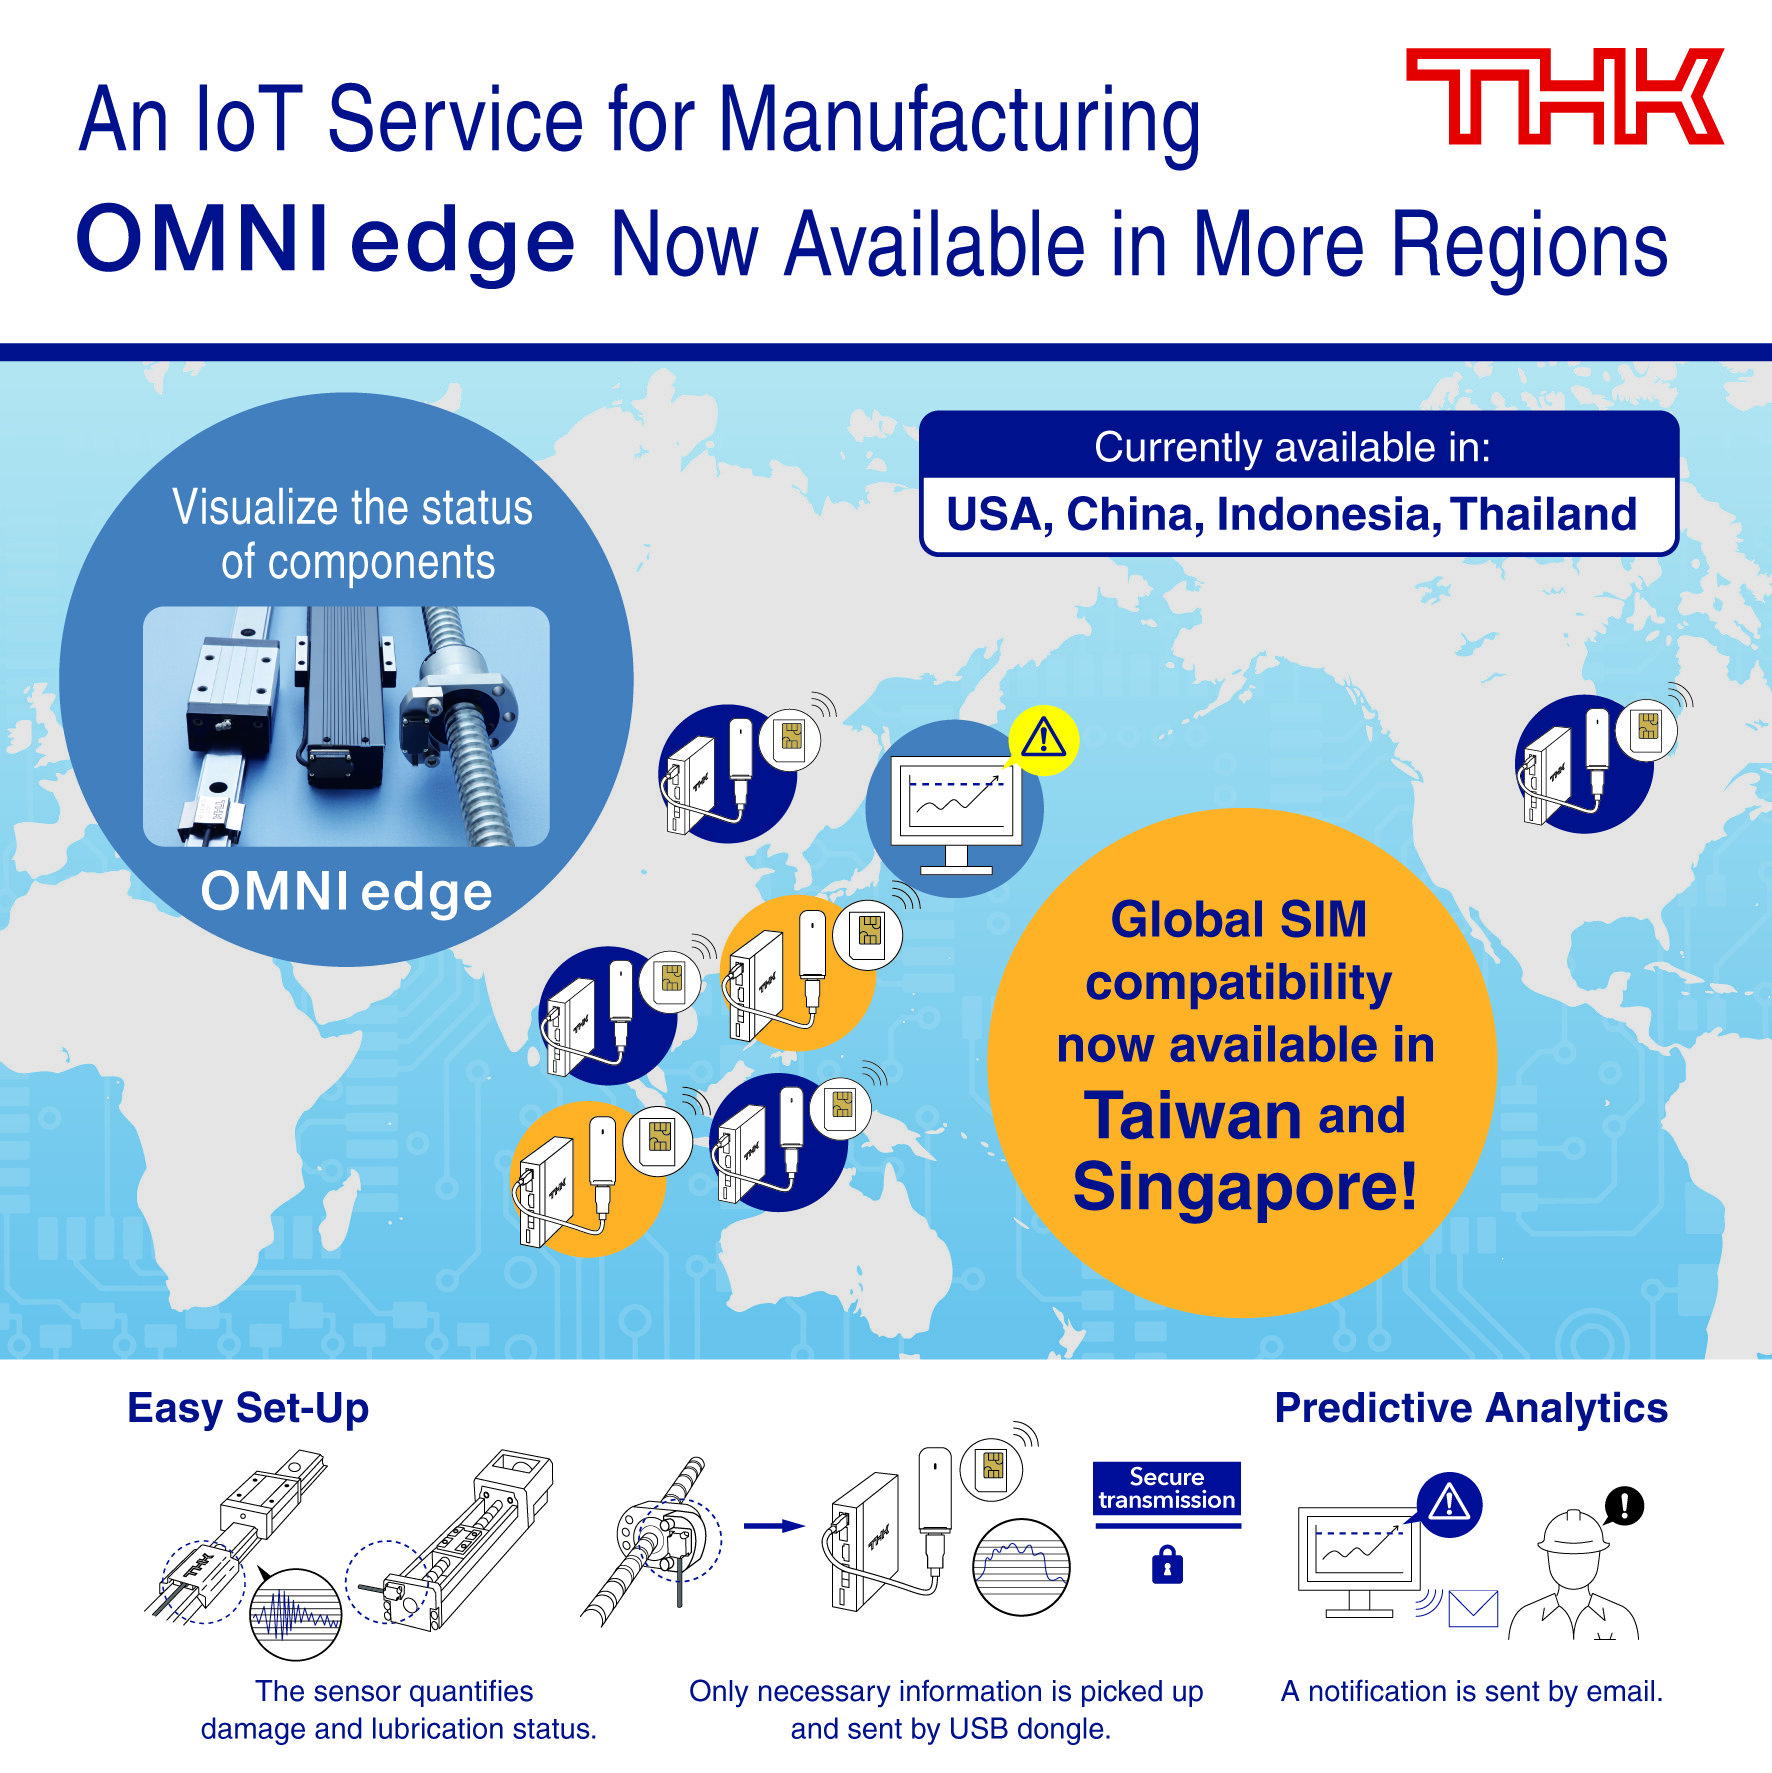 Global SIM Compatibility for the OMNIedge IoT Service